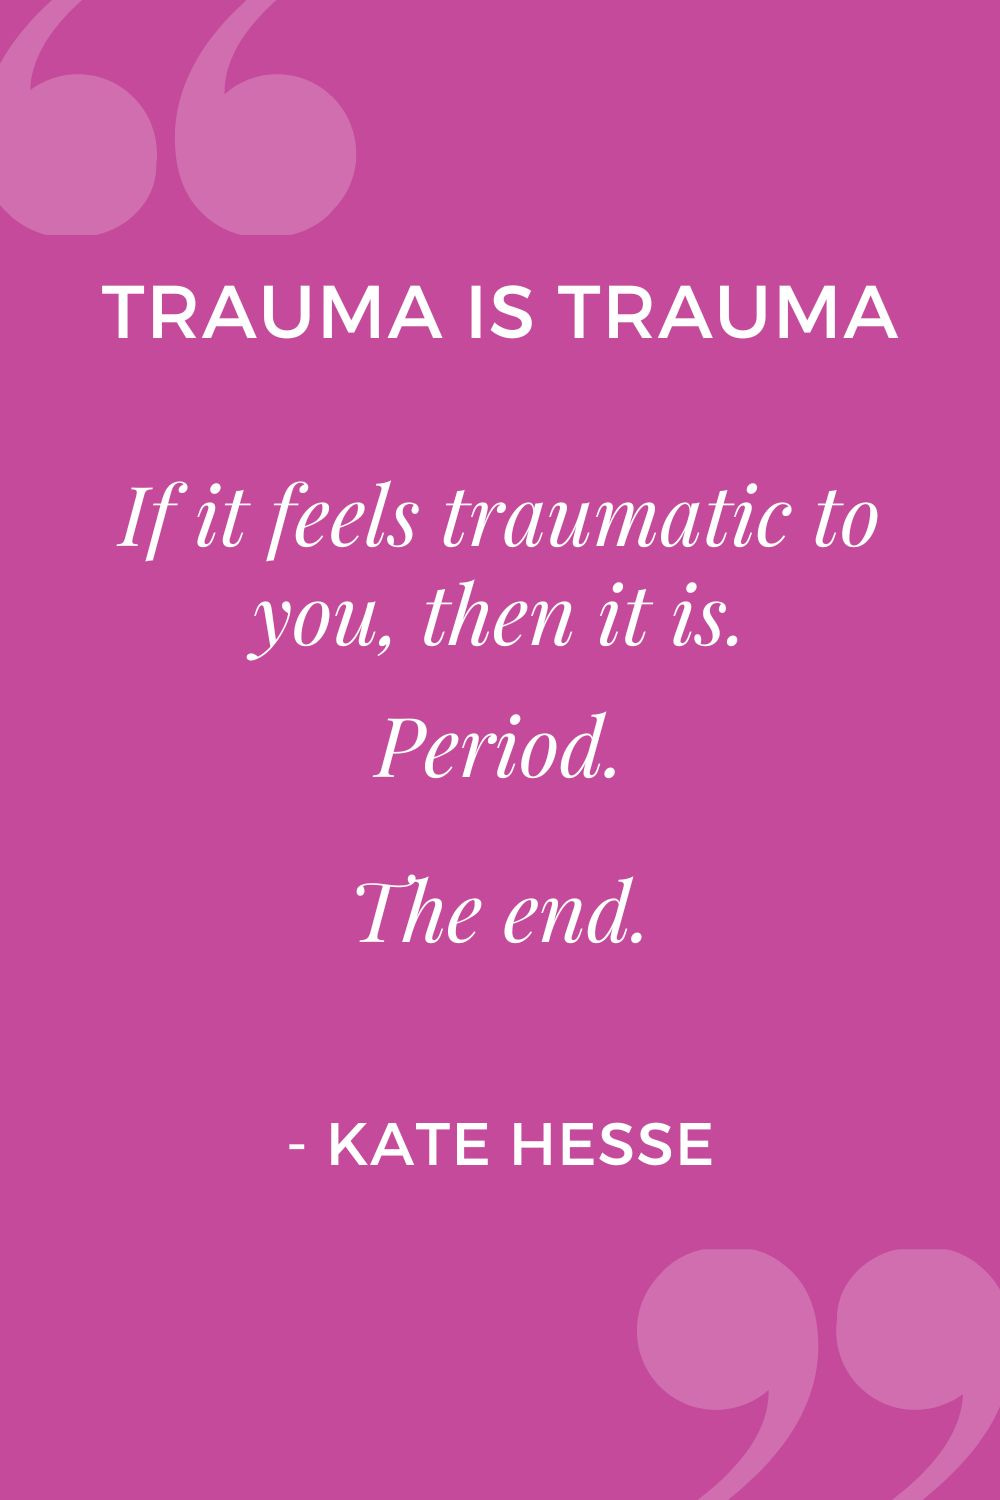 If it feels traumatic to you, then it is. Period. The end.